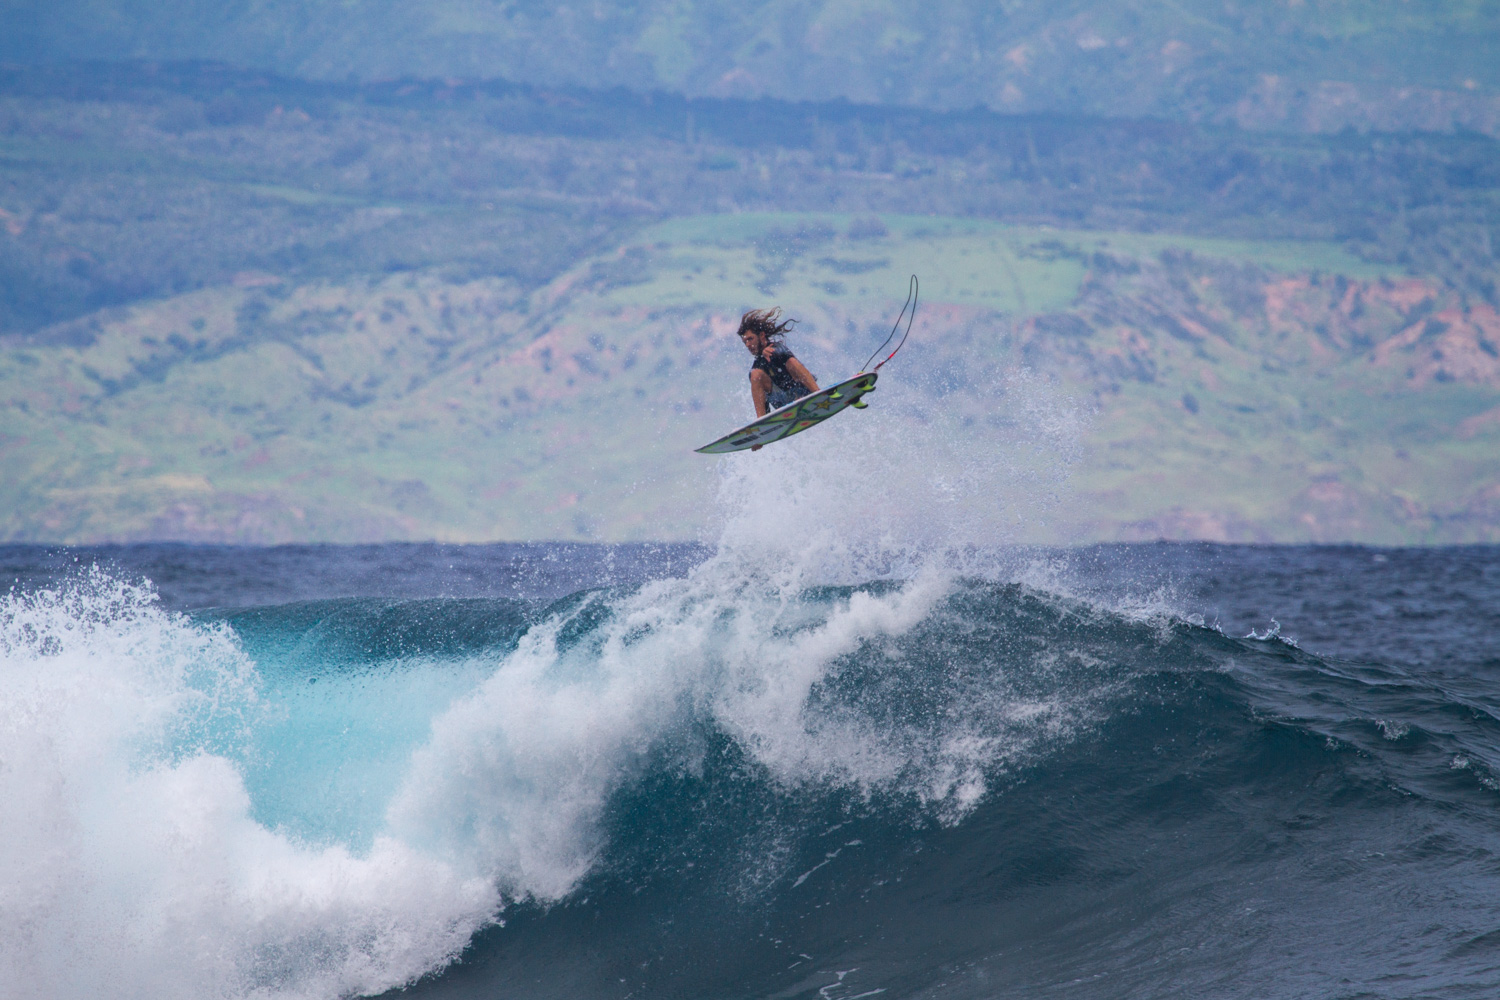 Photographer and University of Hawaii Student Nick Ricca Is Reframing the Surf Scene